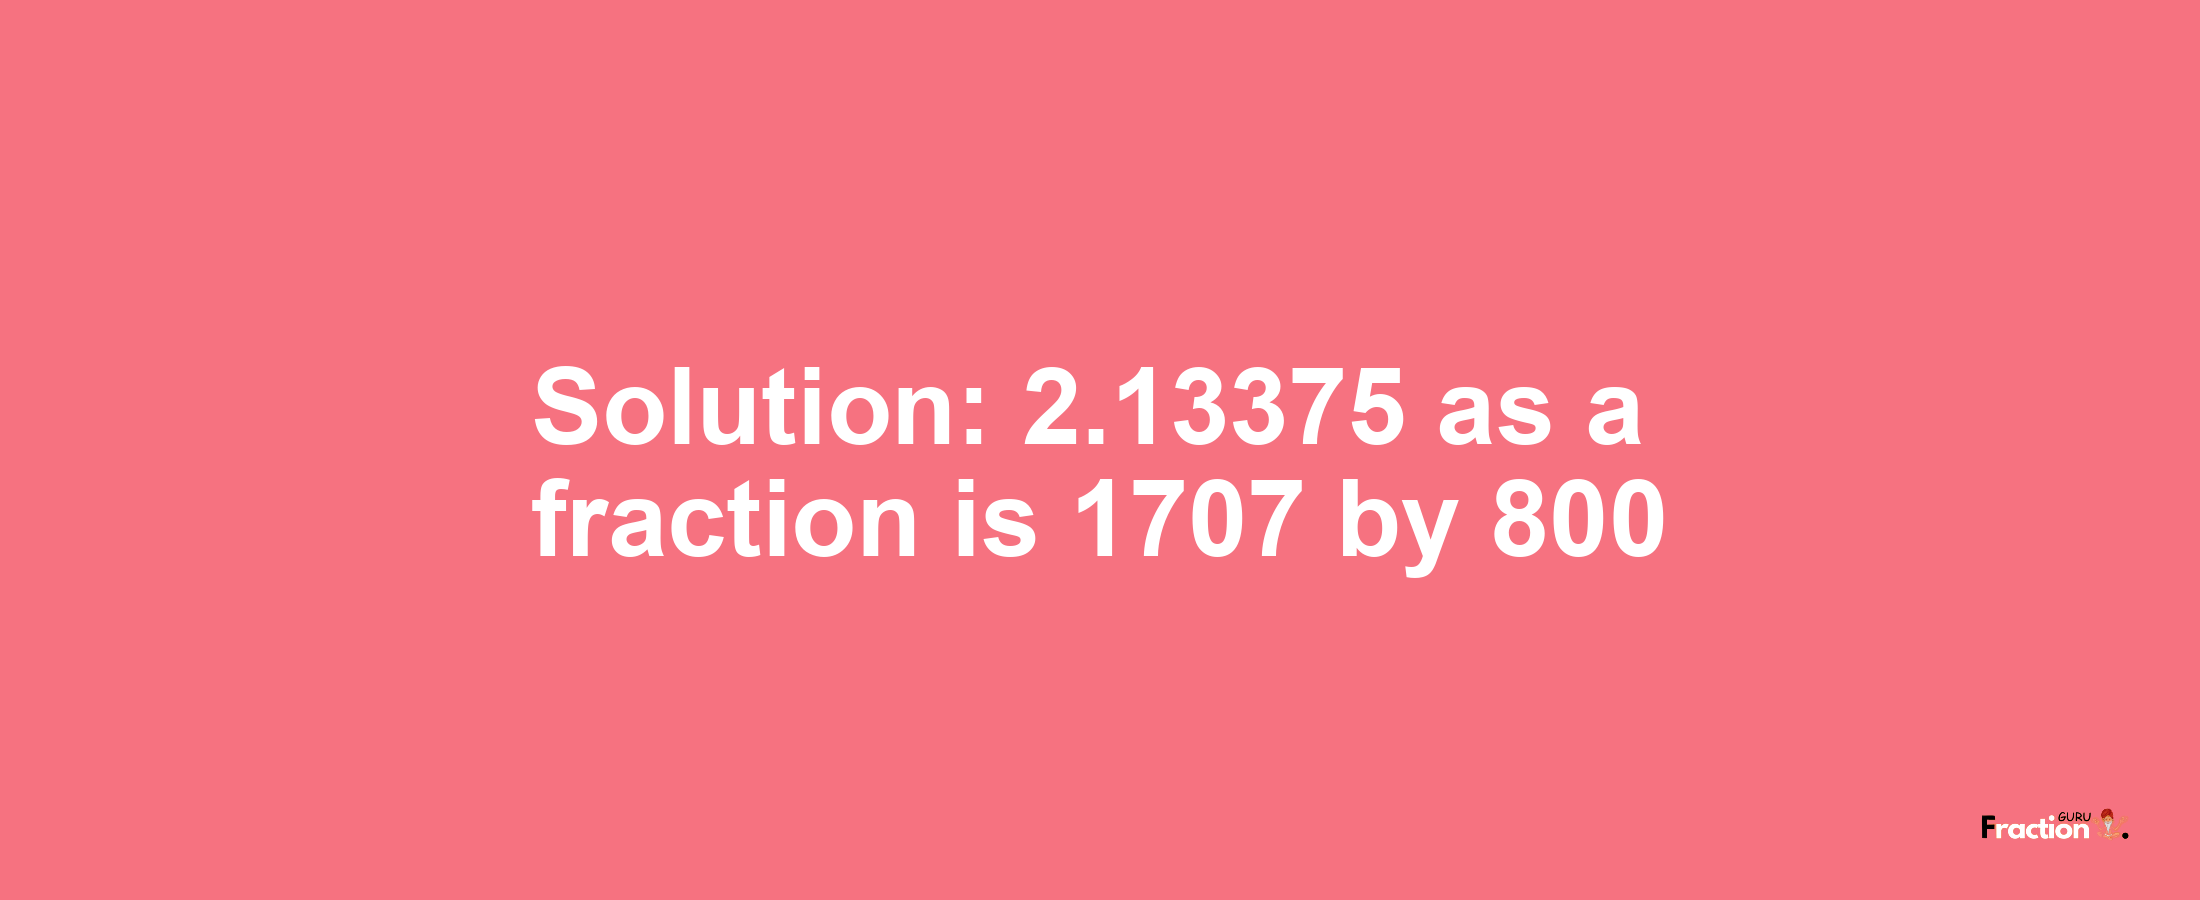 Solution:2.13375 as a fraction is 1707/800